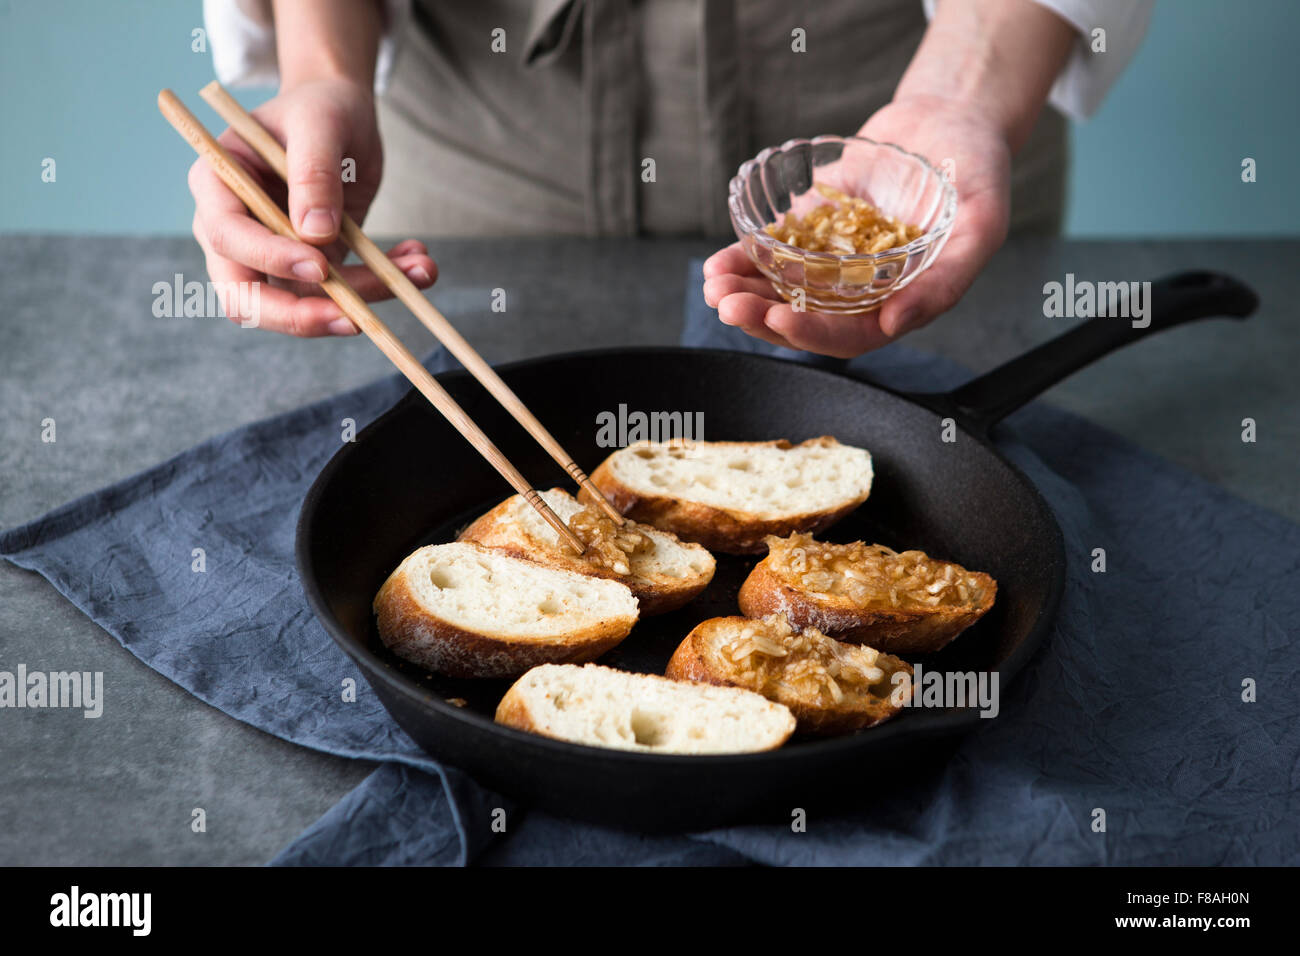 Garnish being placed on the slices of baguette in the pan Stock Photo